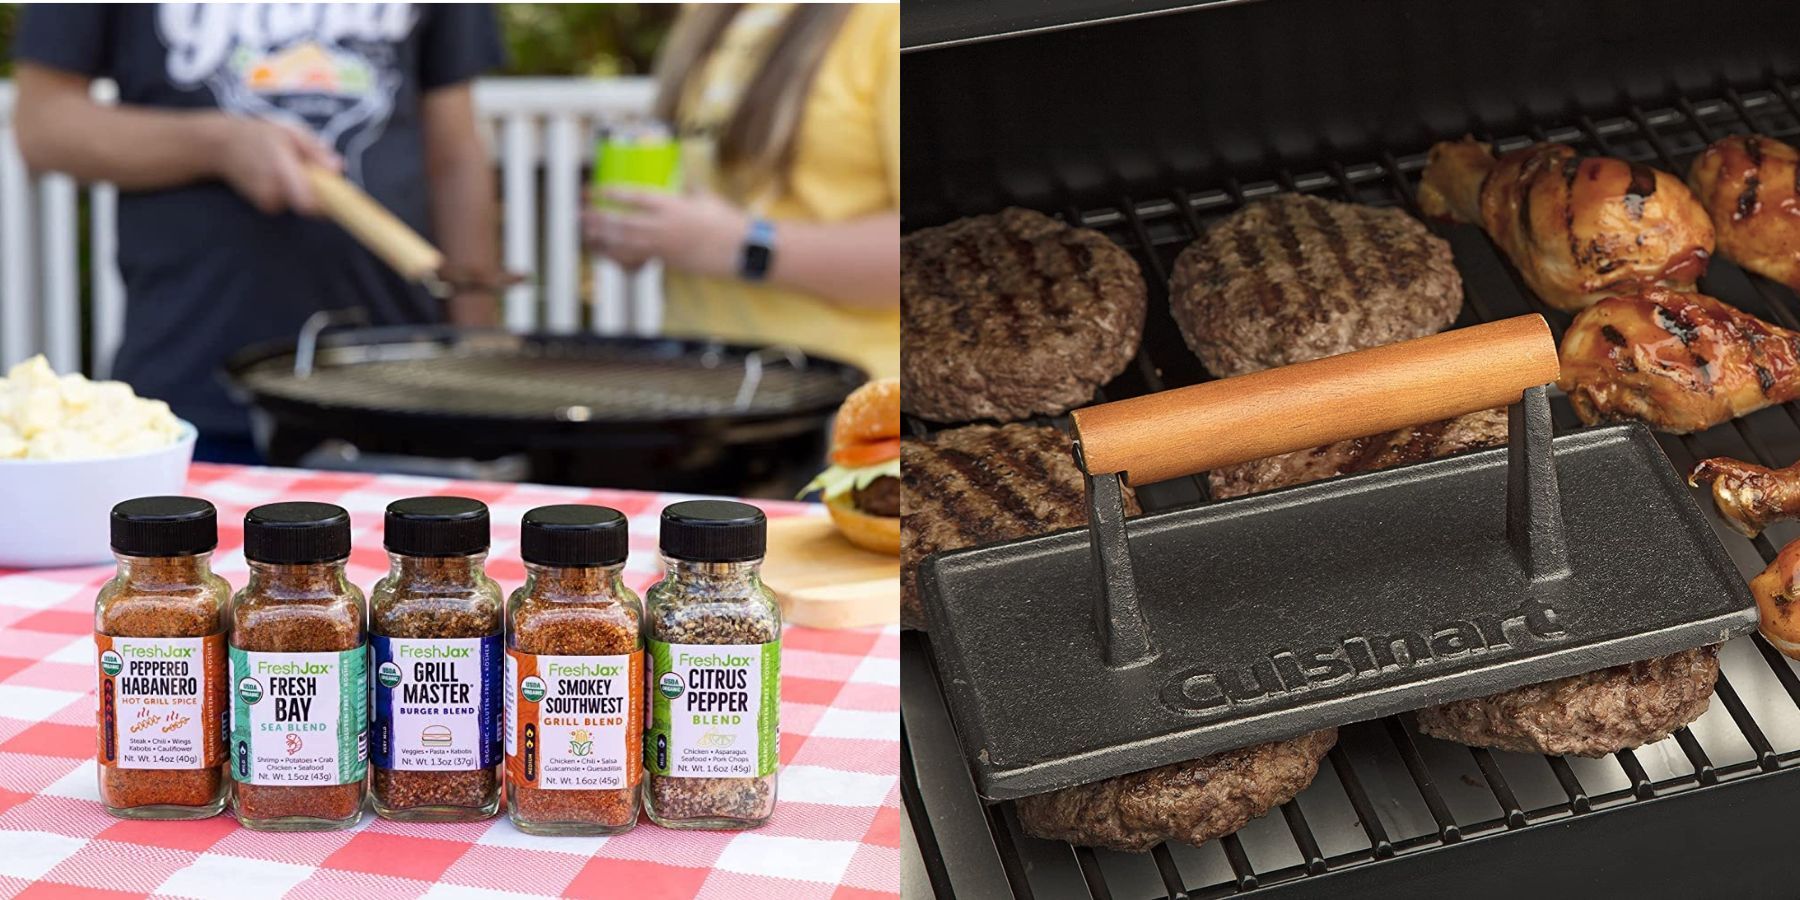 9 Cool and Great Grill Accessories and Tools - Design Swan